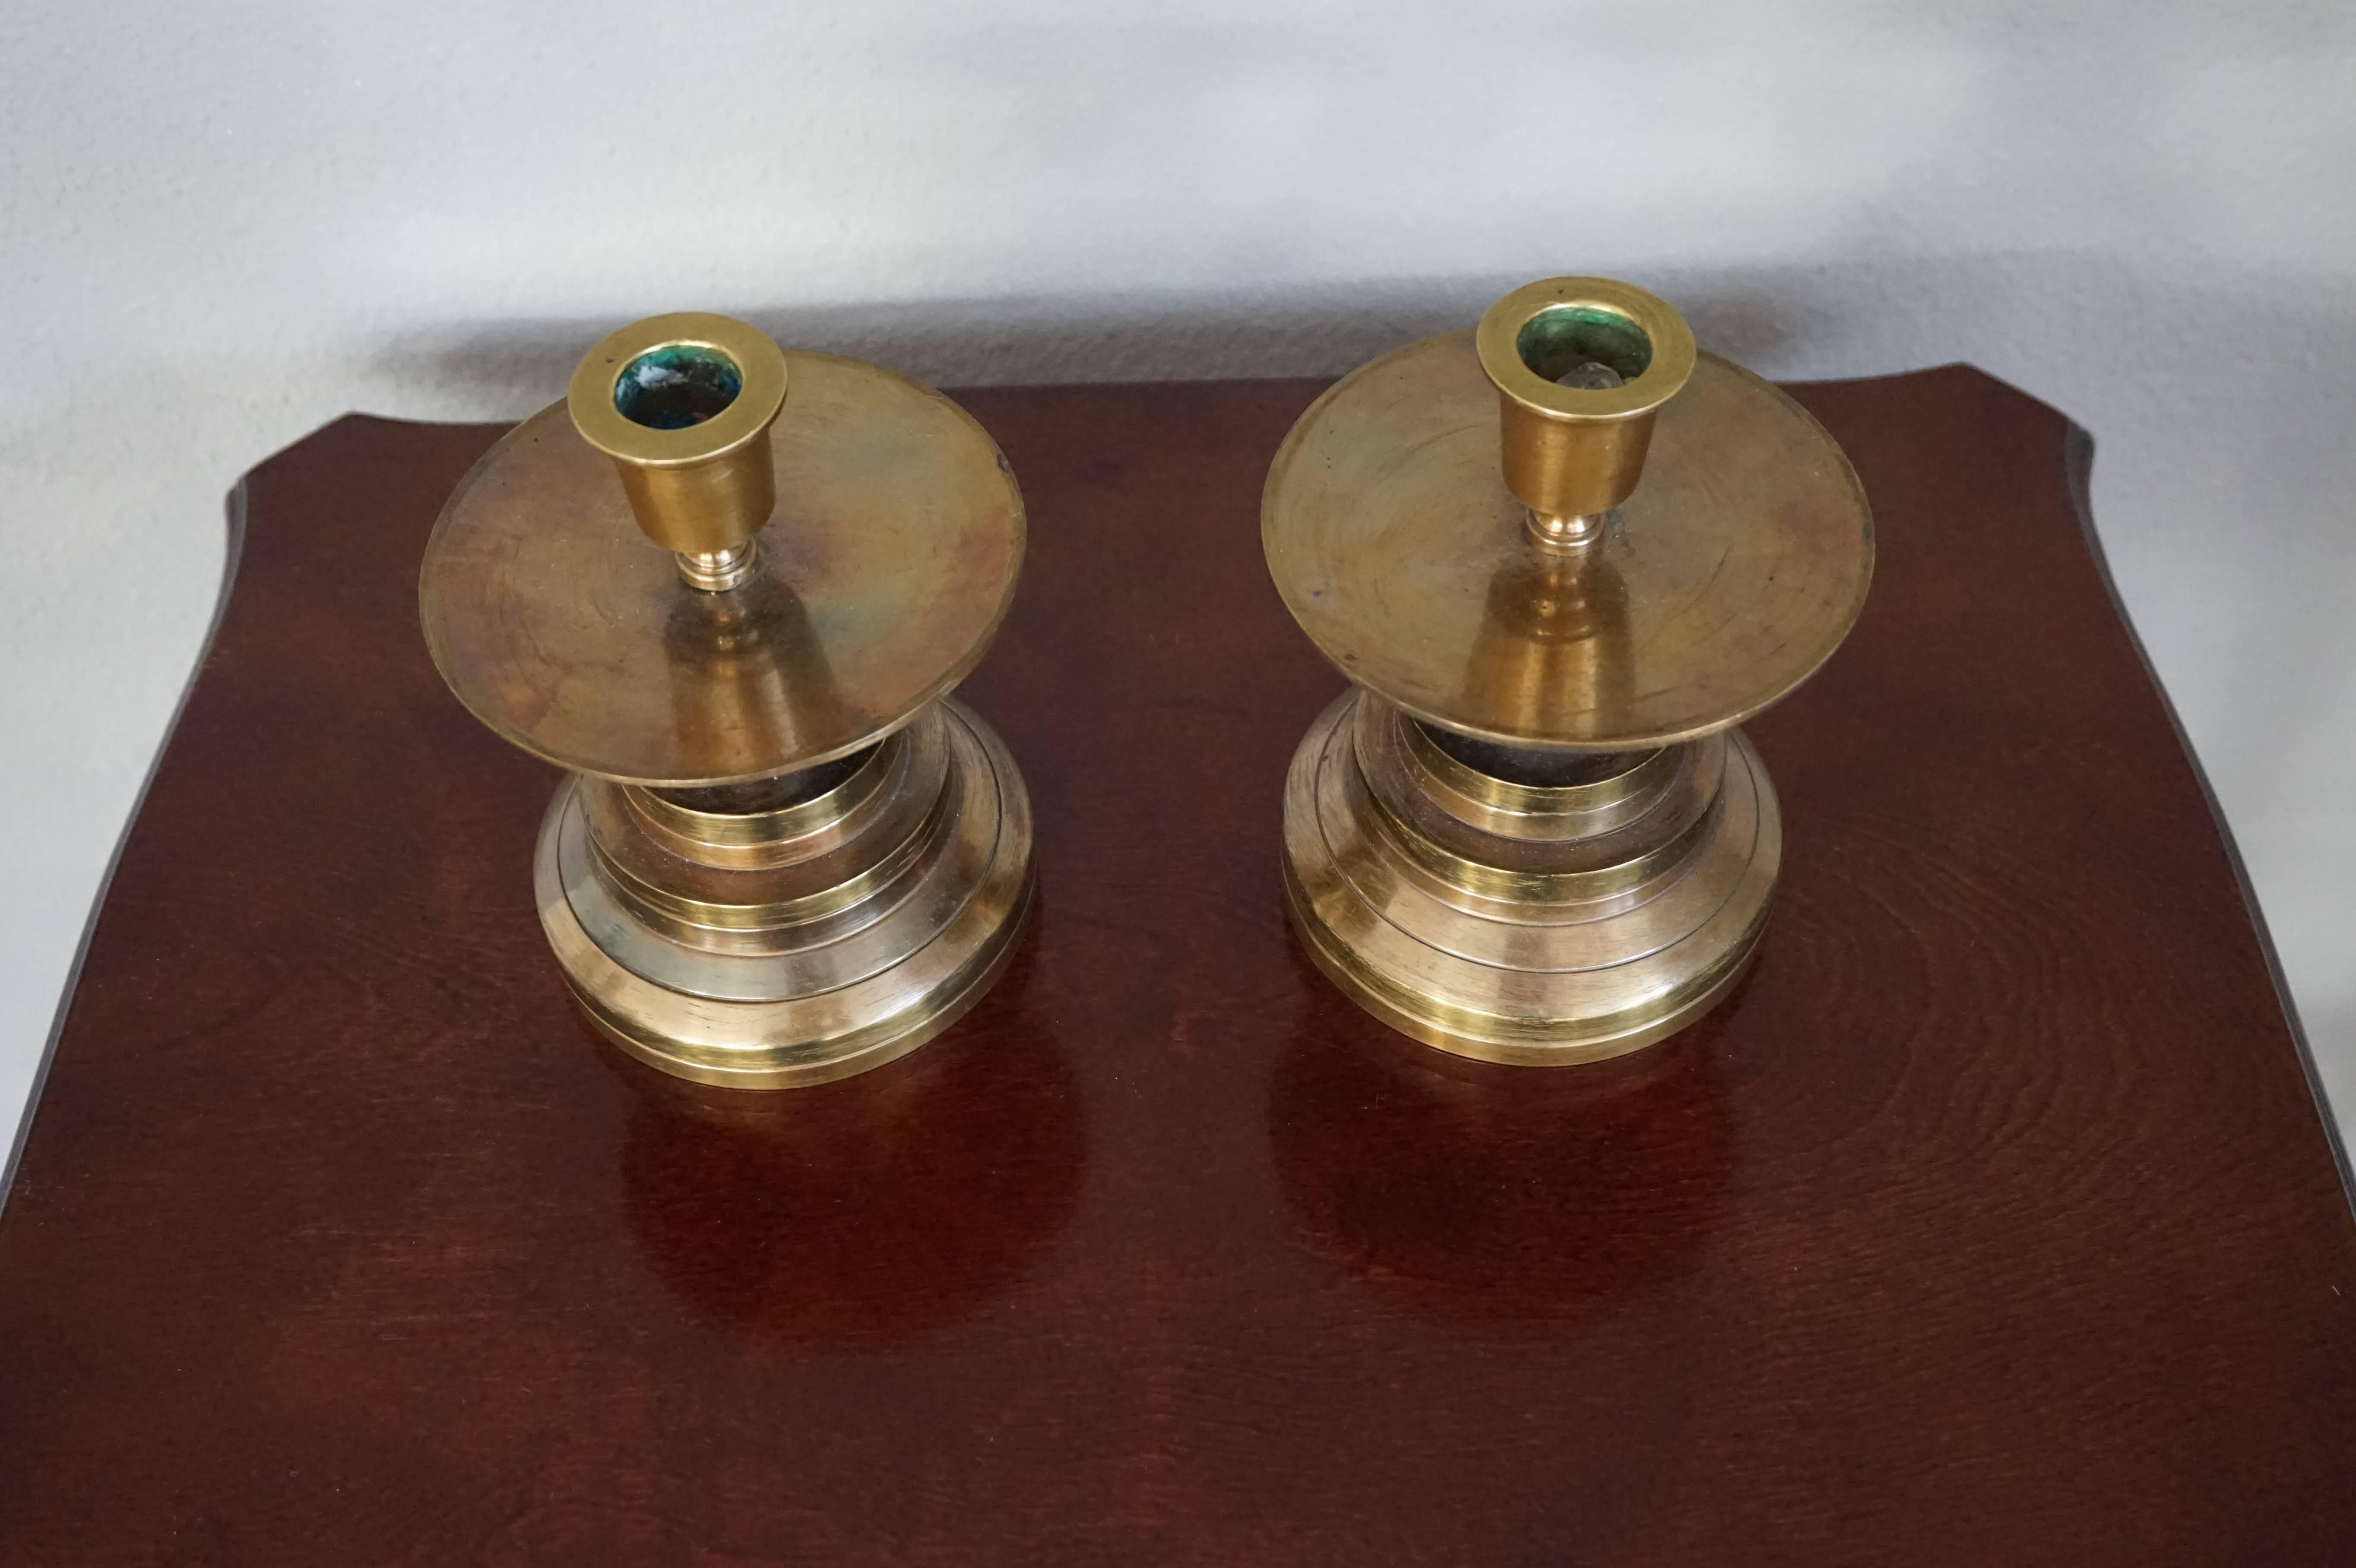 Cast Vintage Solid Brass Art Deco Style Candle Sticks Candle Holders